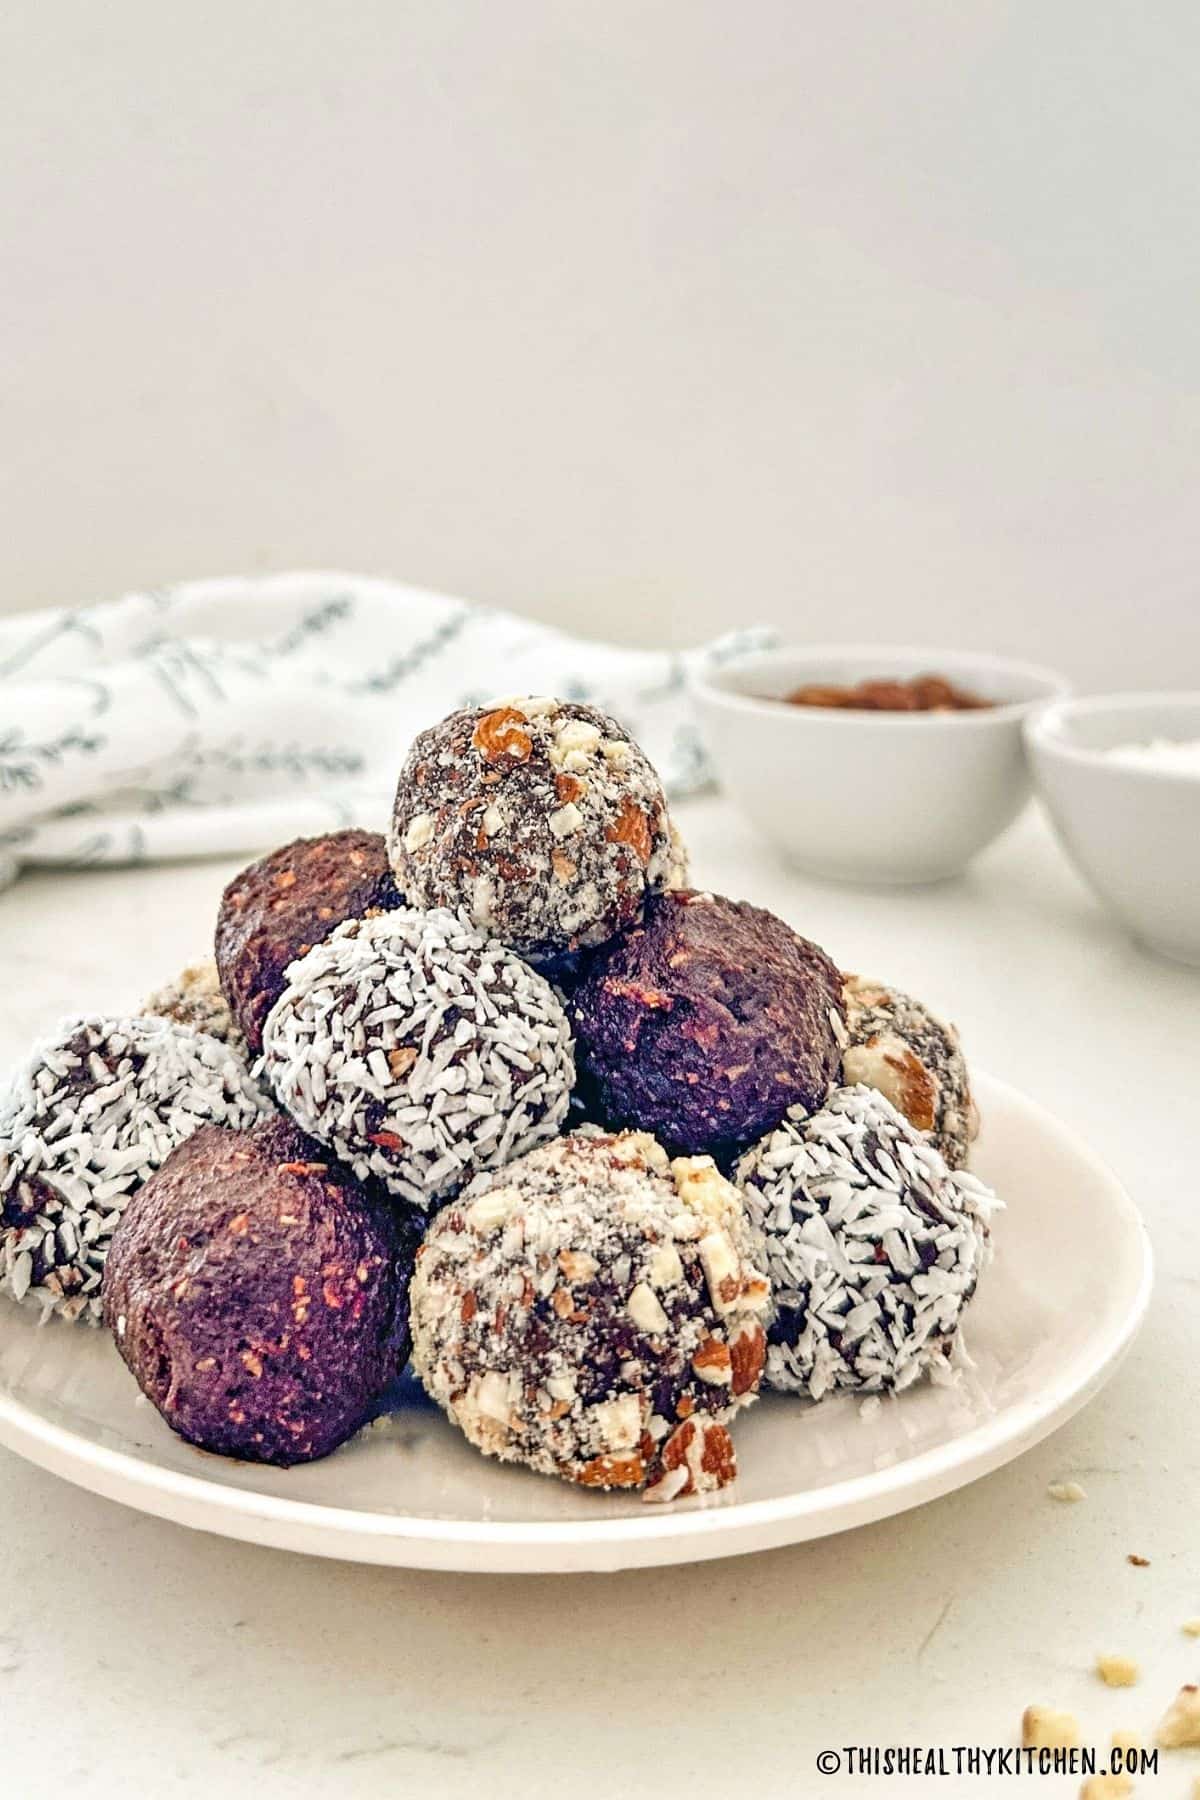 Chocolate balls in white plate with crushed almonds and coconut shreds around them.